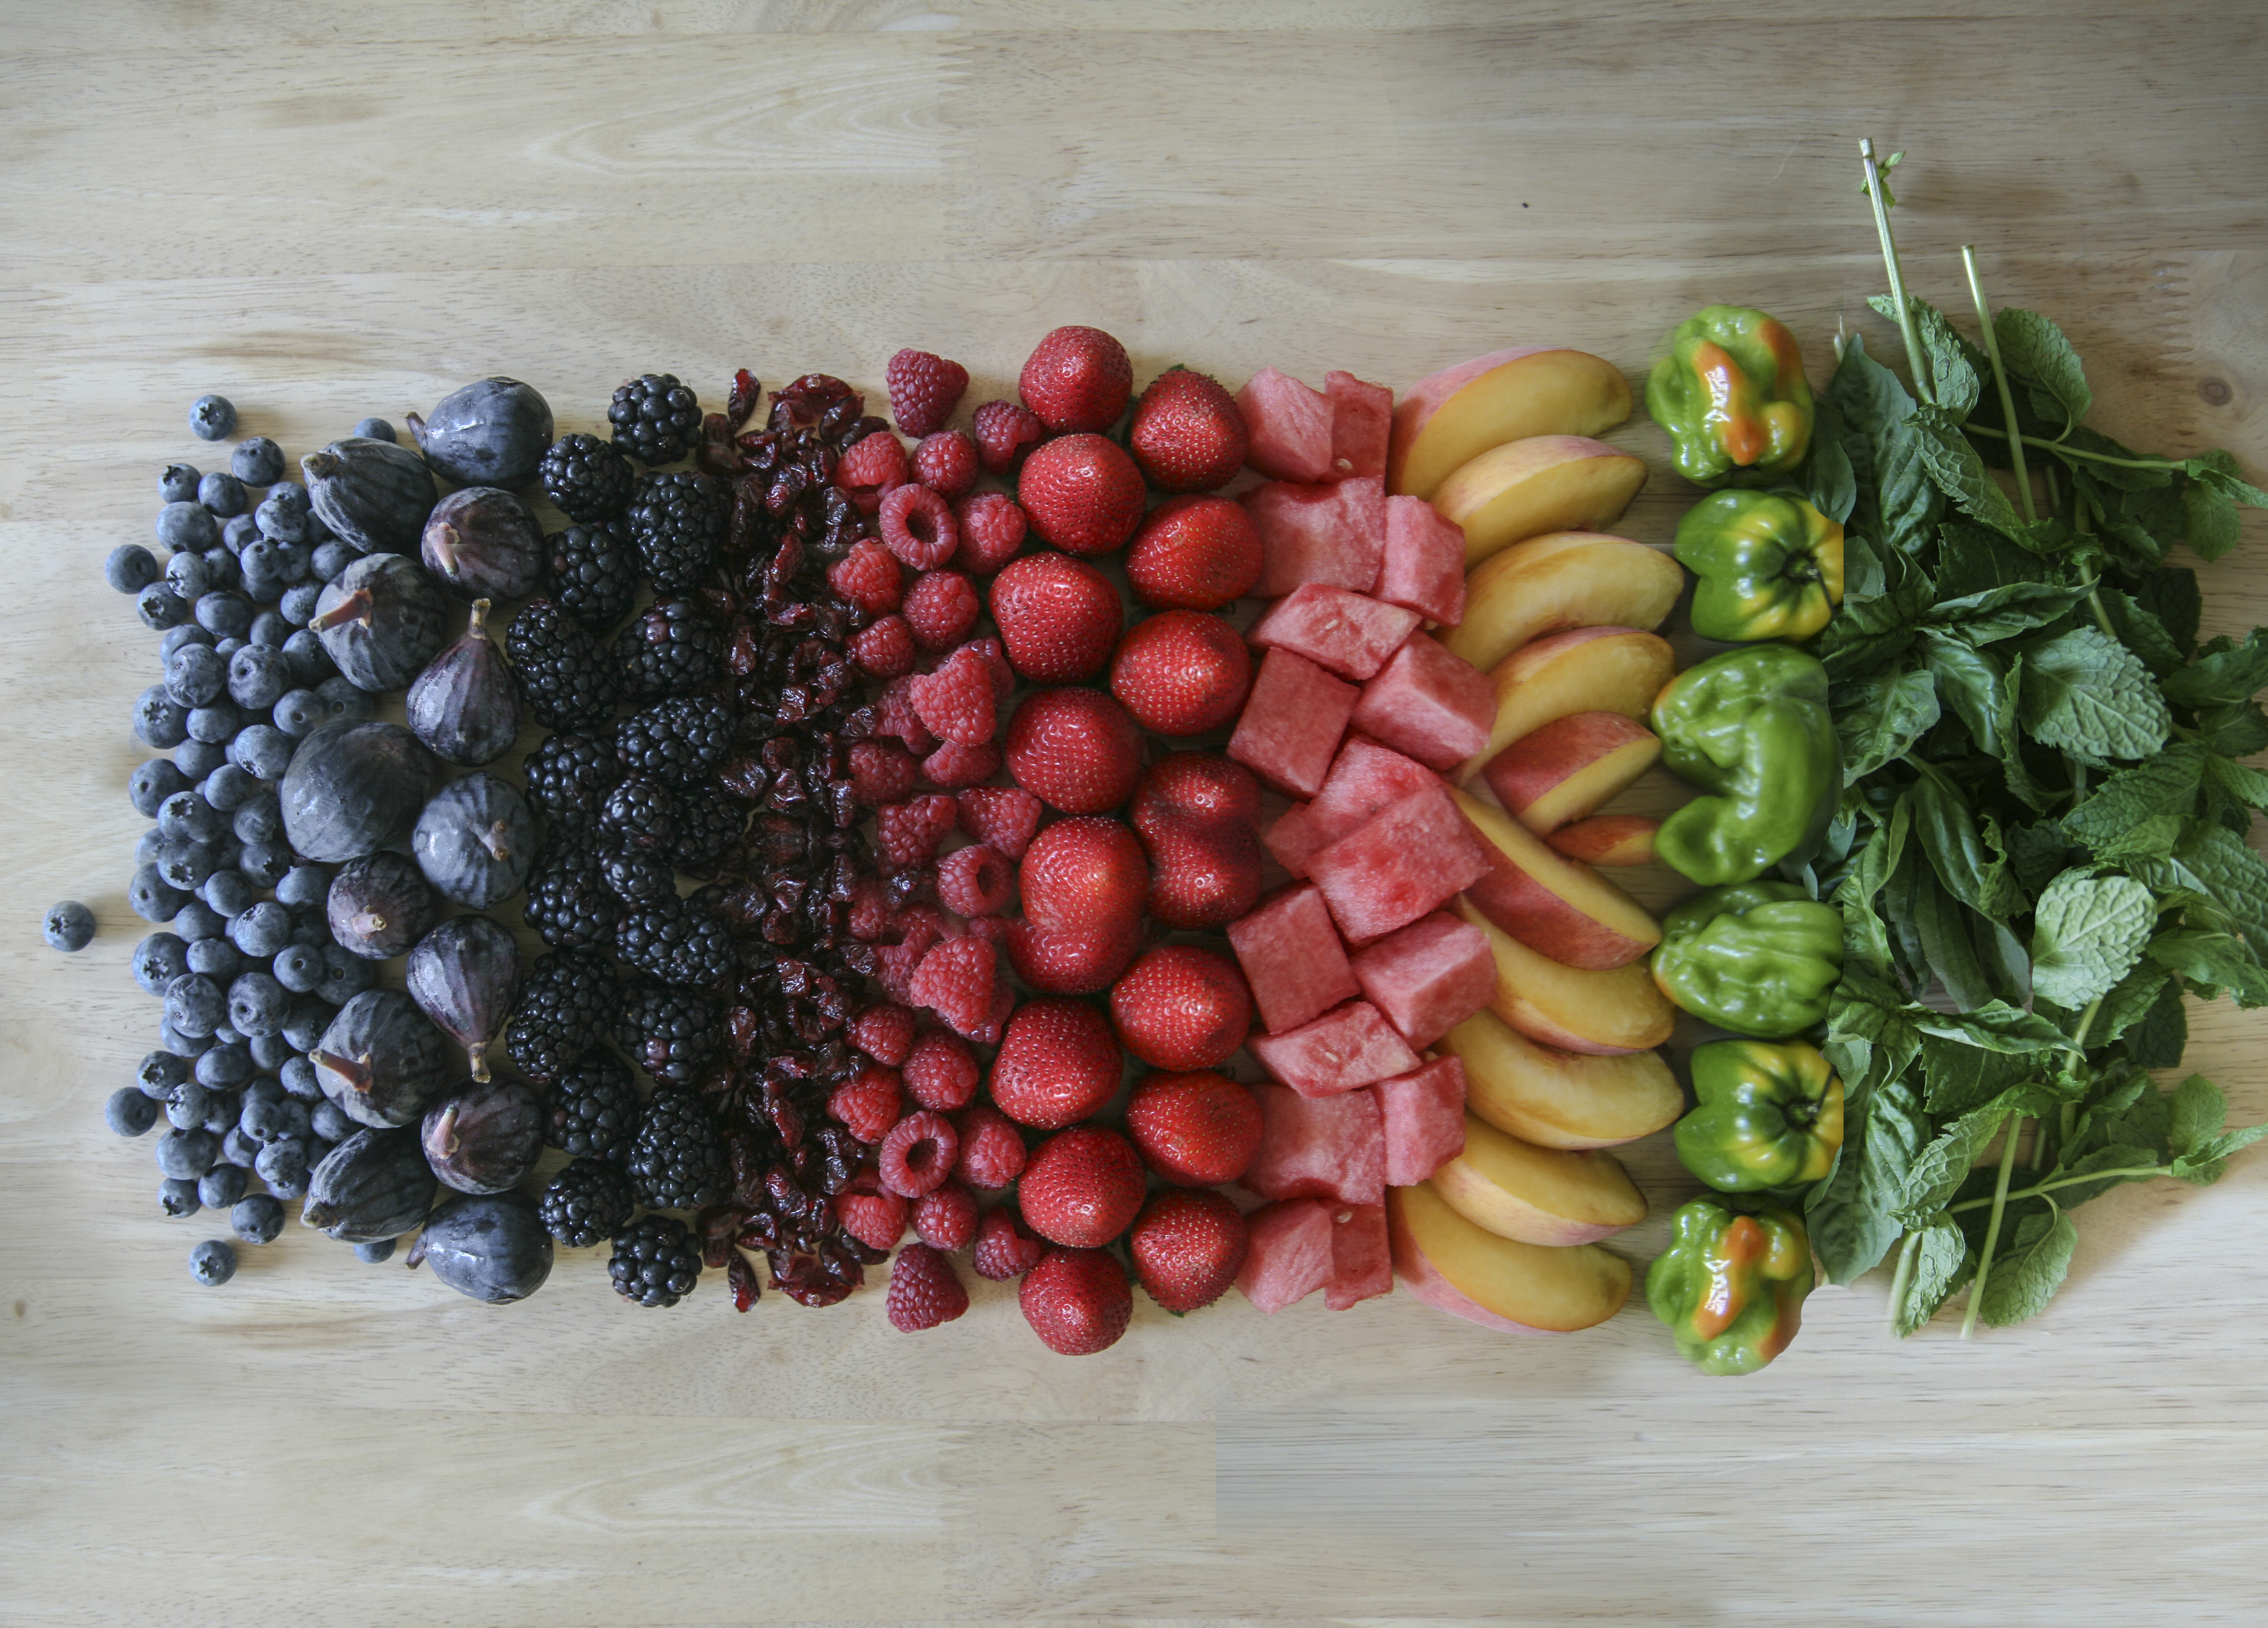 The American Institute for Cancer Research recommends a rainbow diet